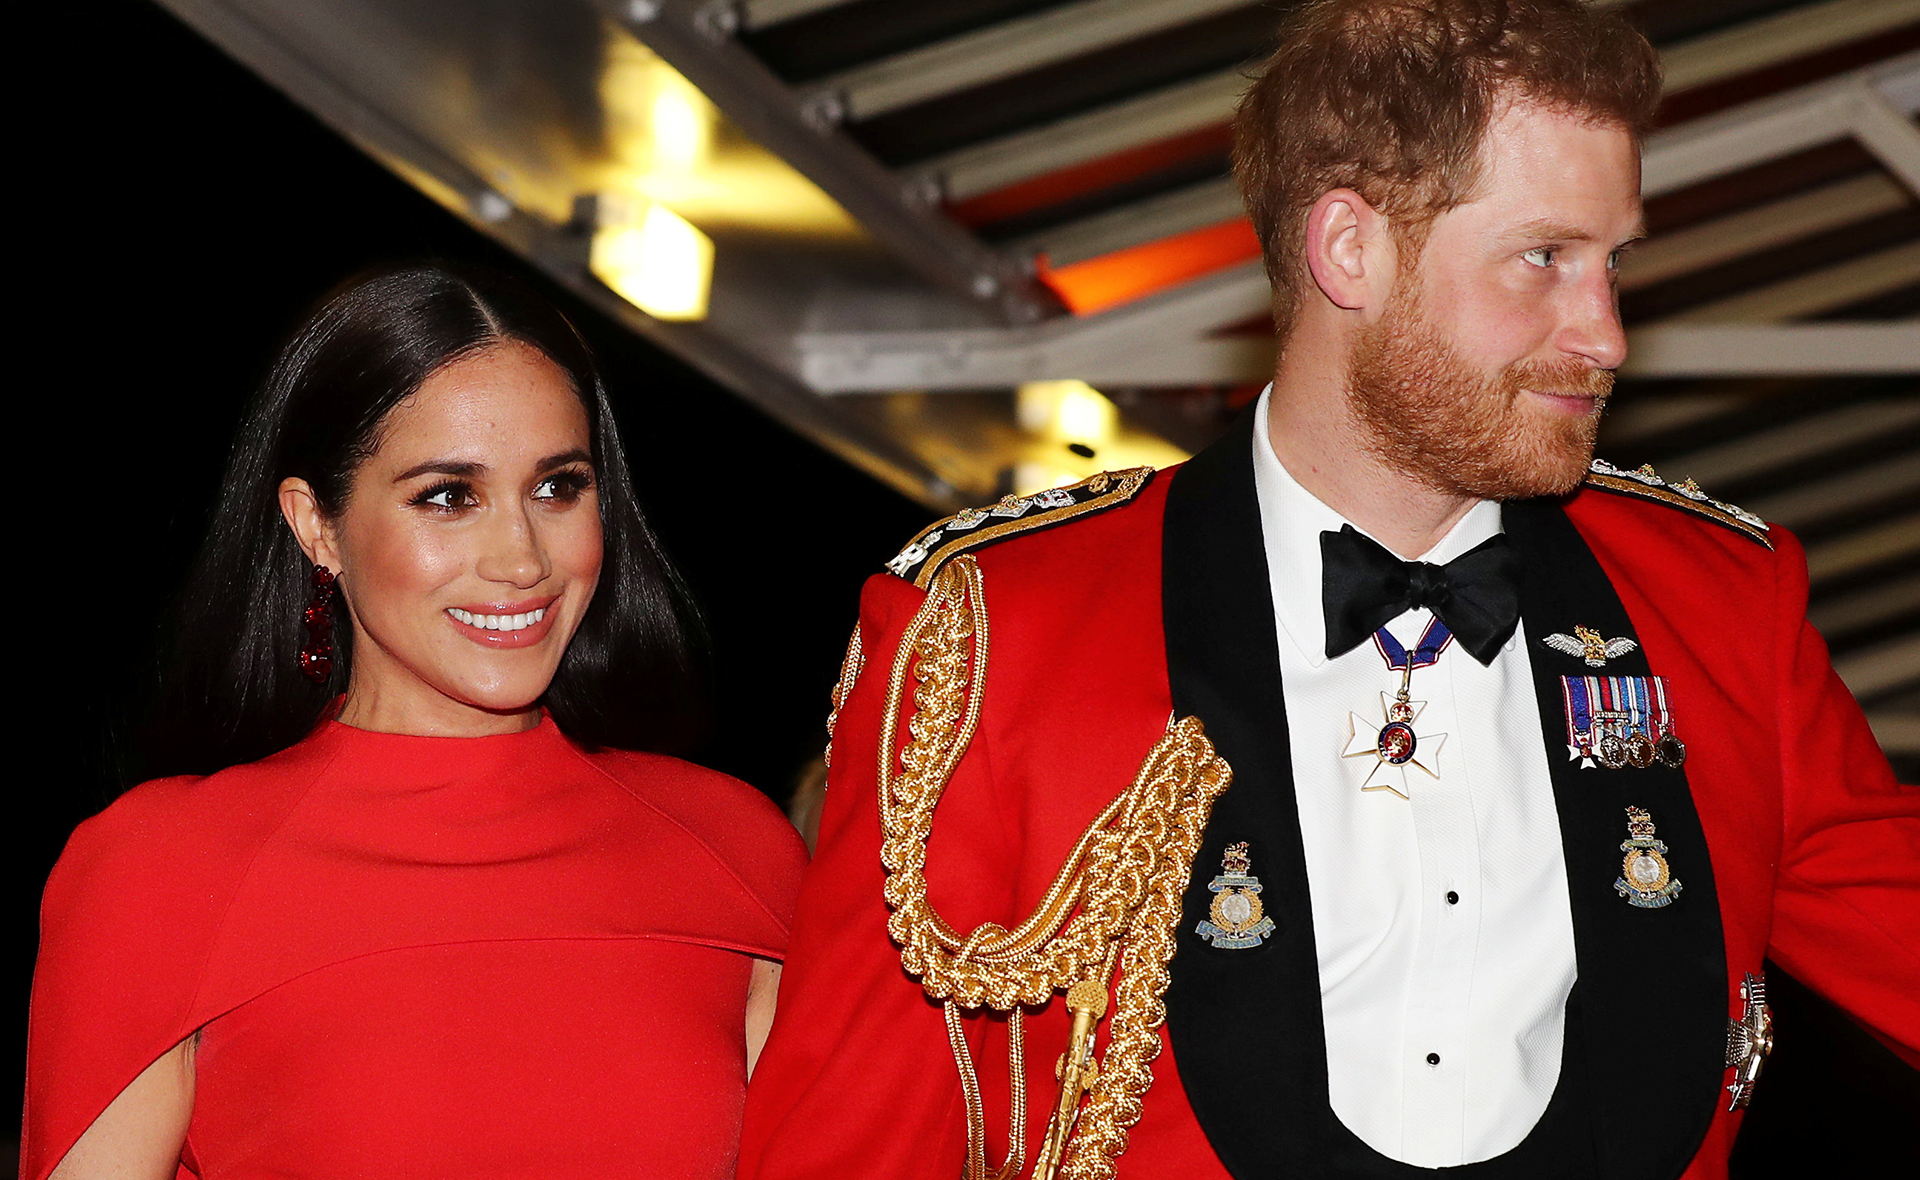 New details added to divisive biography about Prince Harry and Meghan Markle after a challenging 12 months